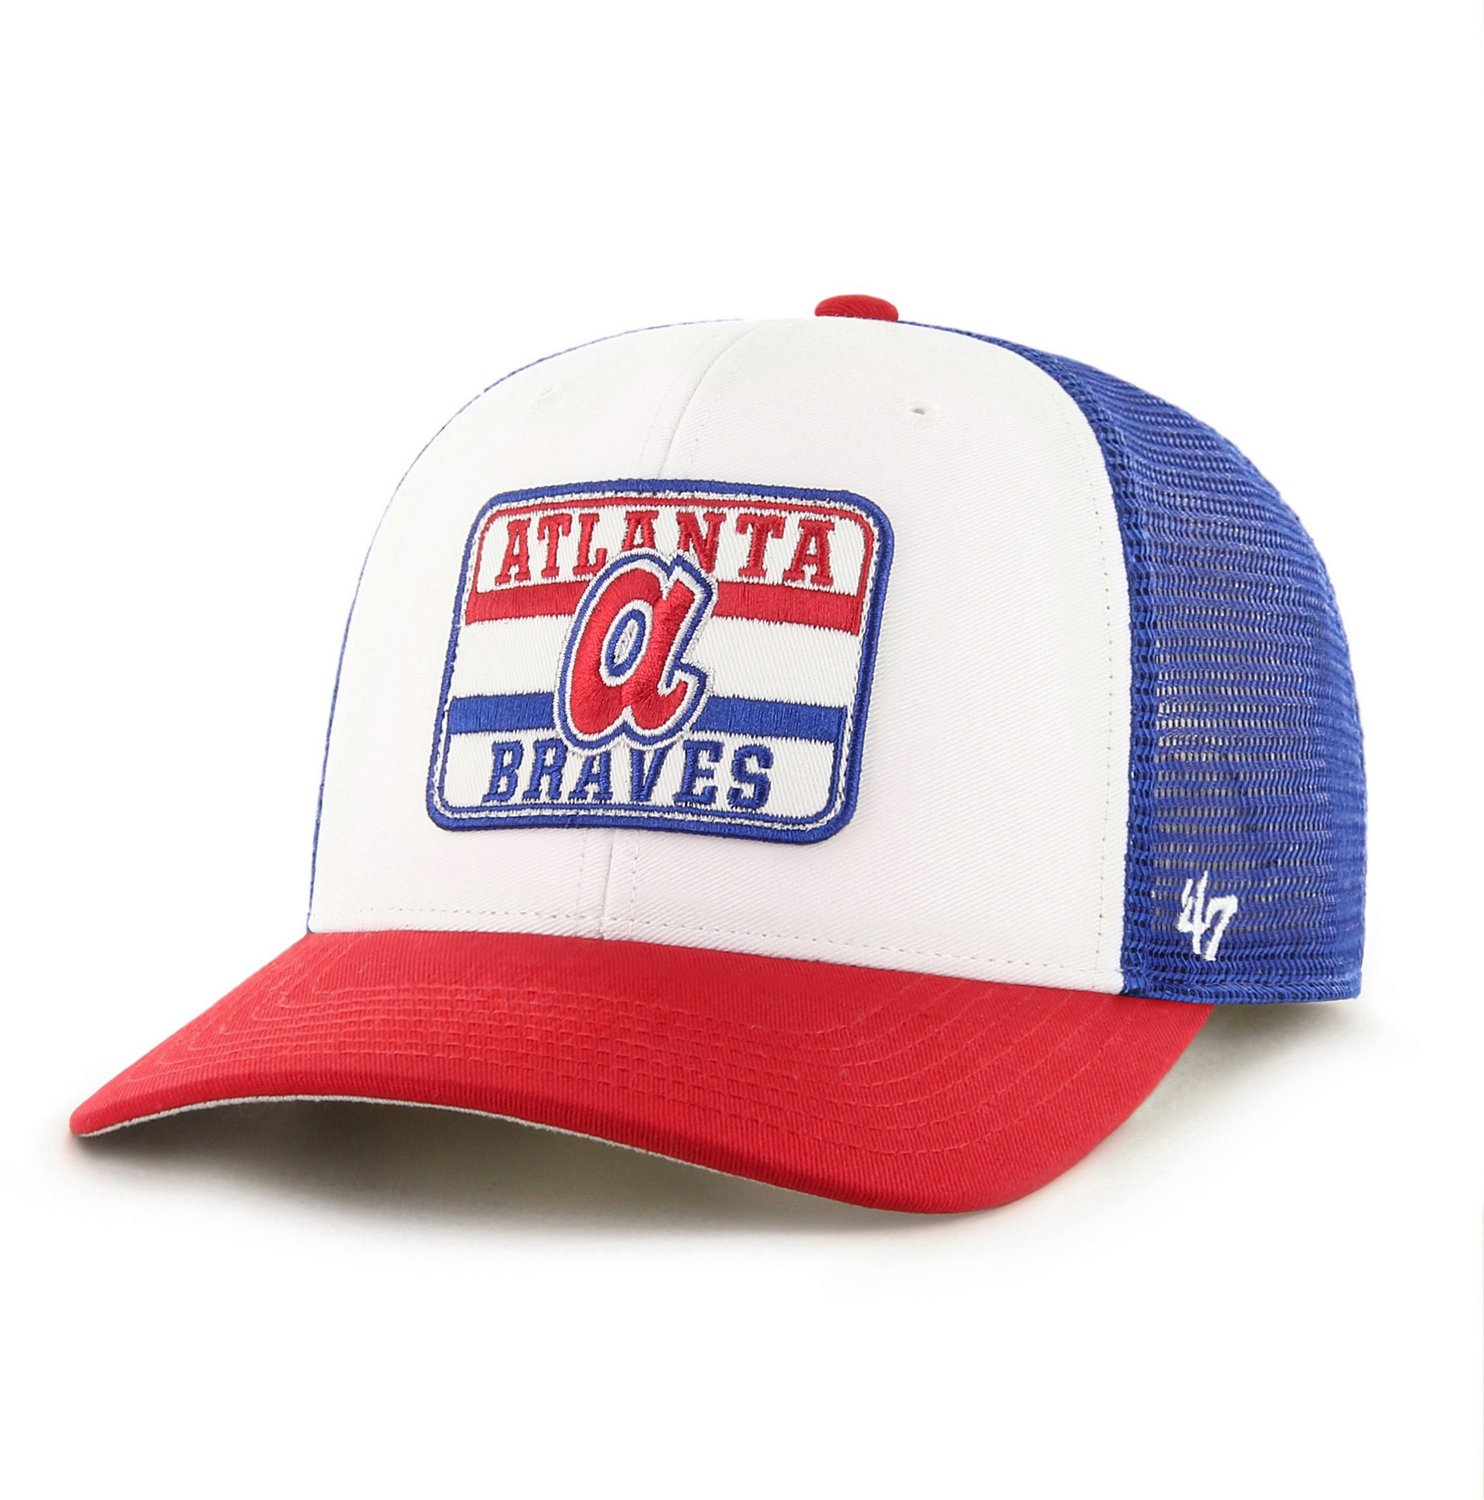 ATLANTA BRAVES COOPERSTOWN CLASSIC '47 FRANCHISE